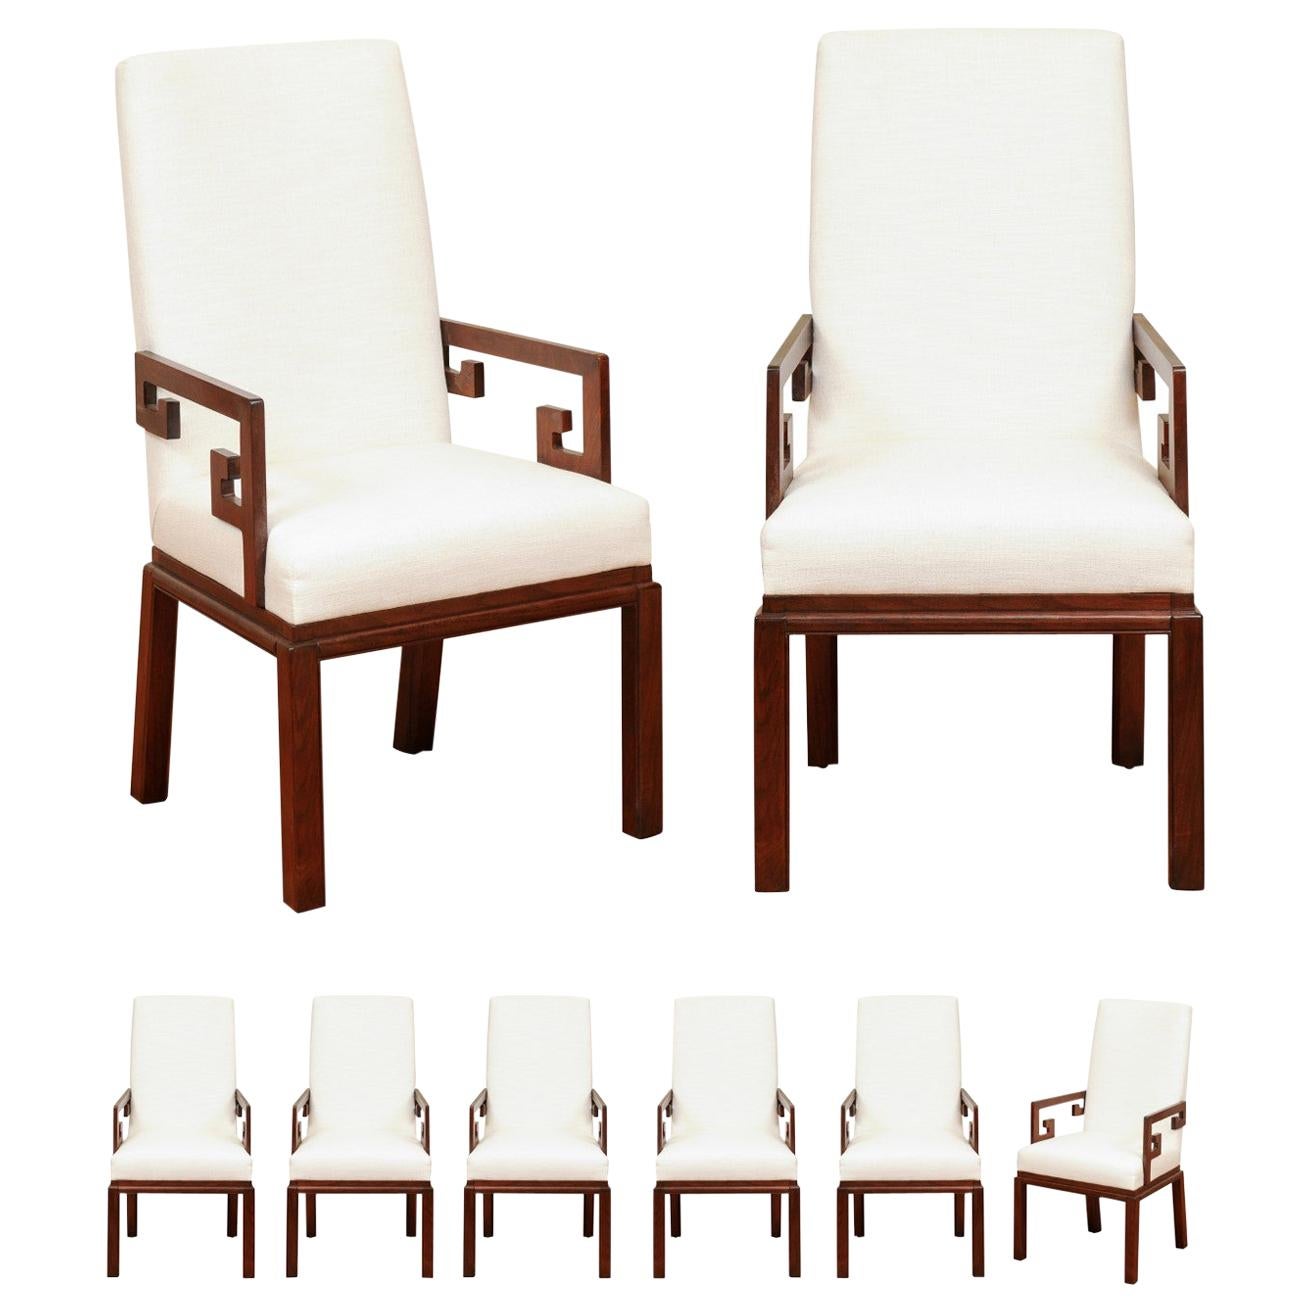 All Arms - Sublime Set of 8 Greek Key Parsons Chairs by Michael Taylor